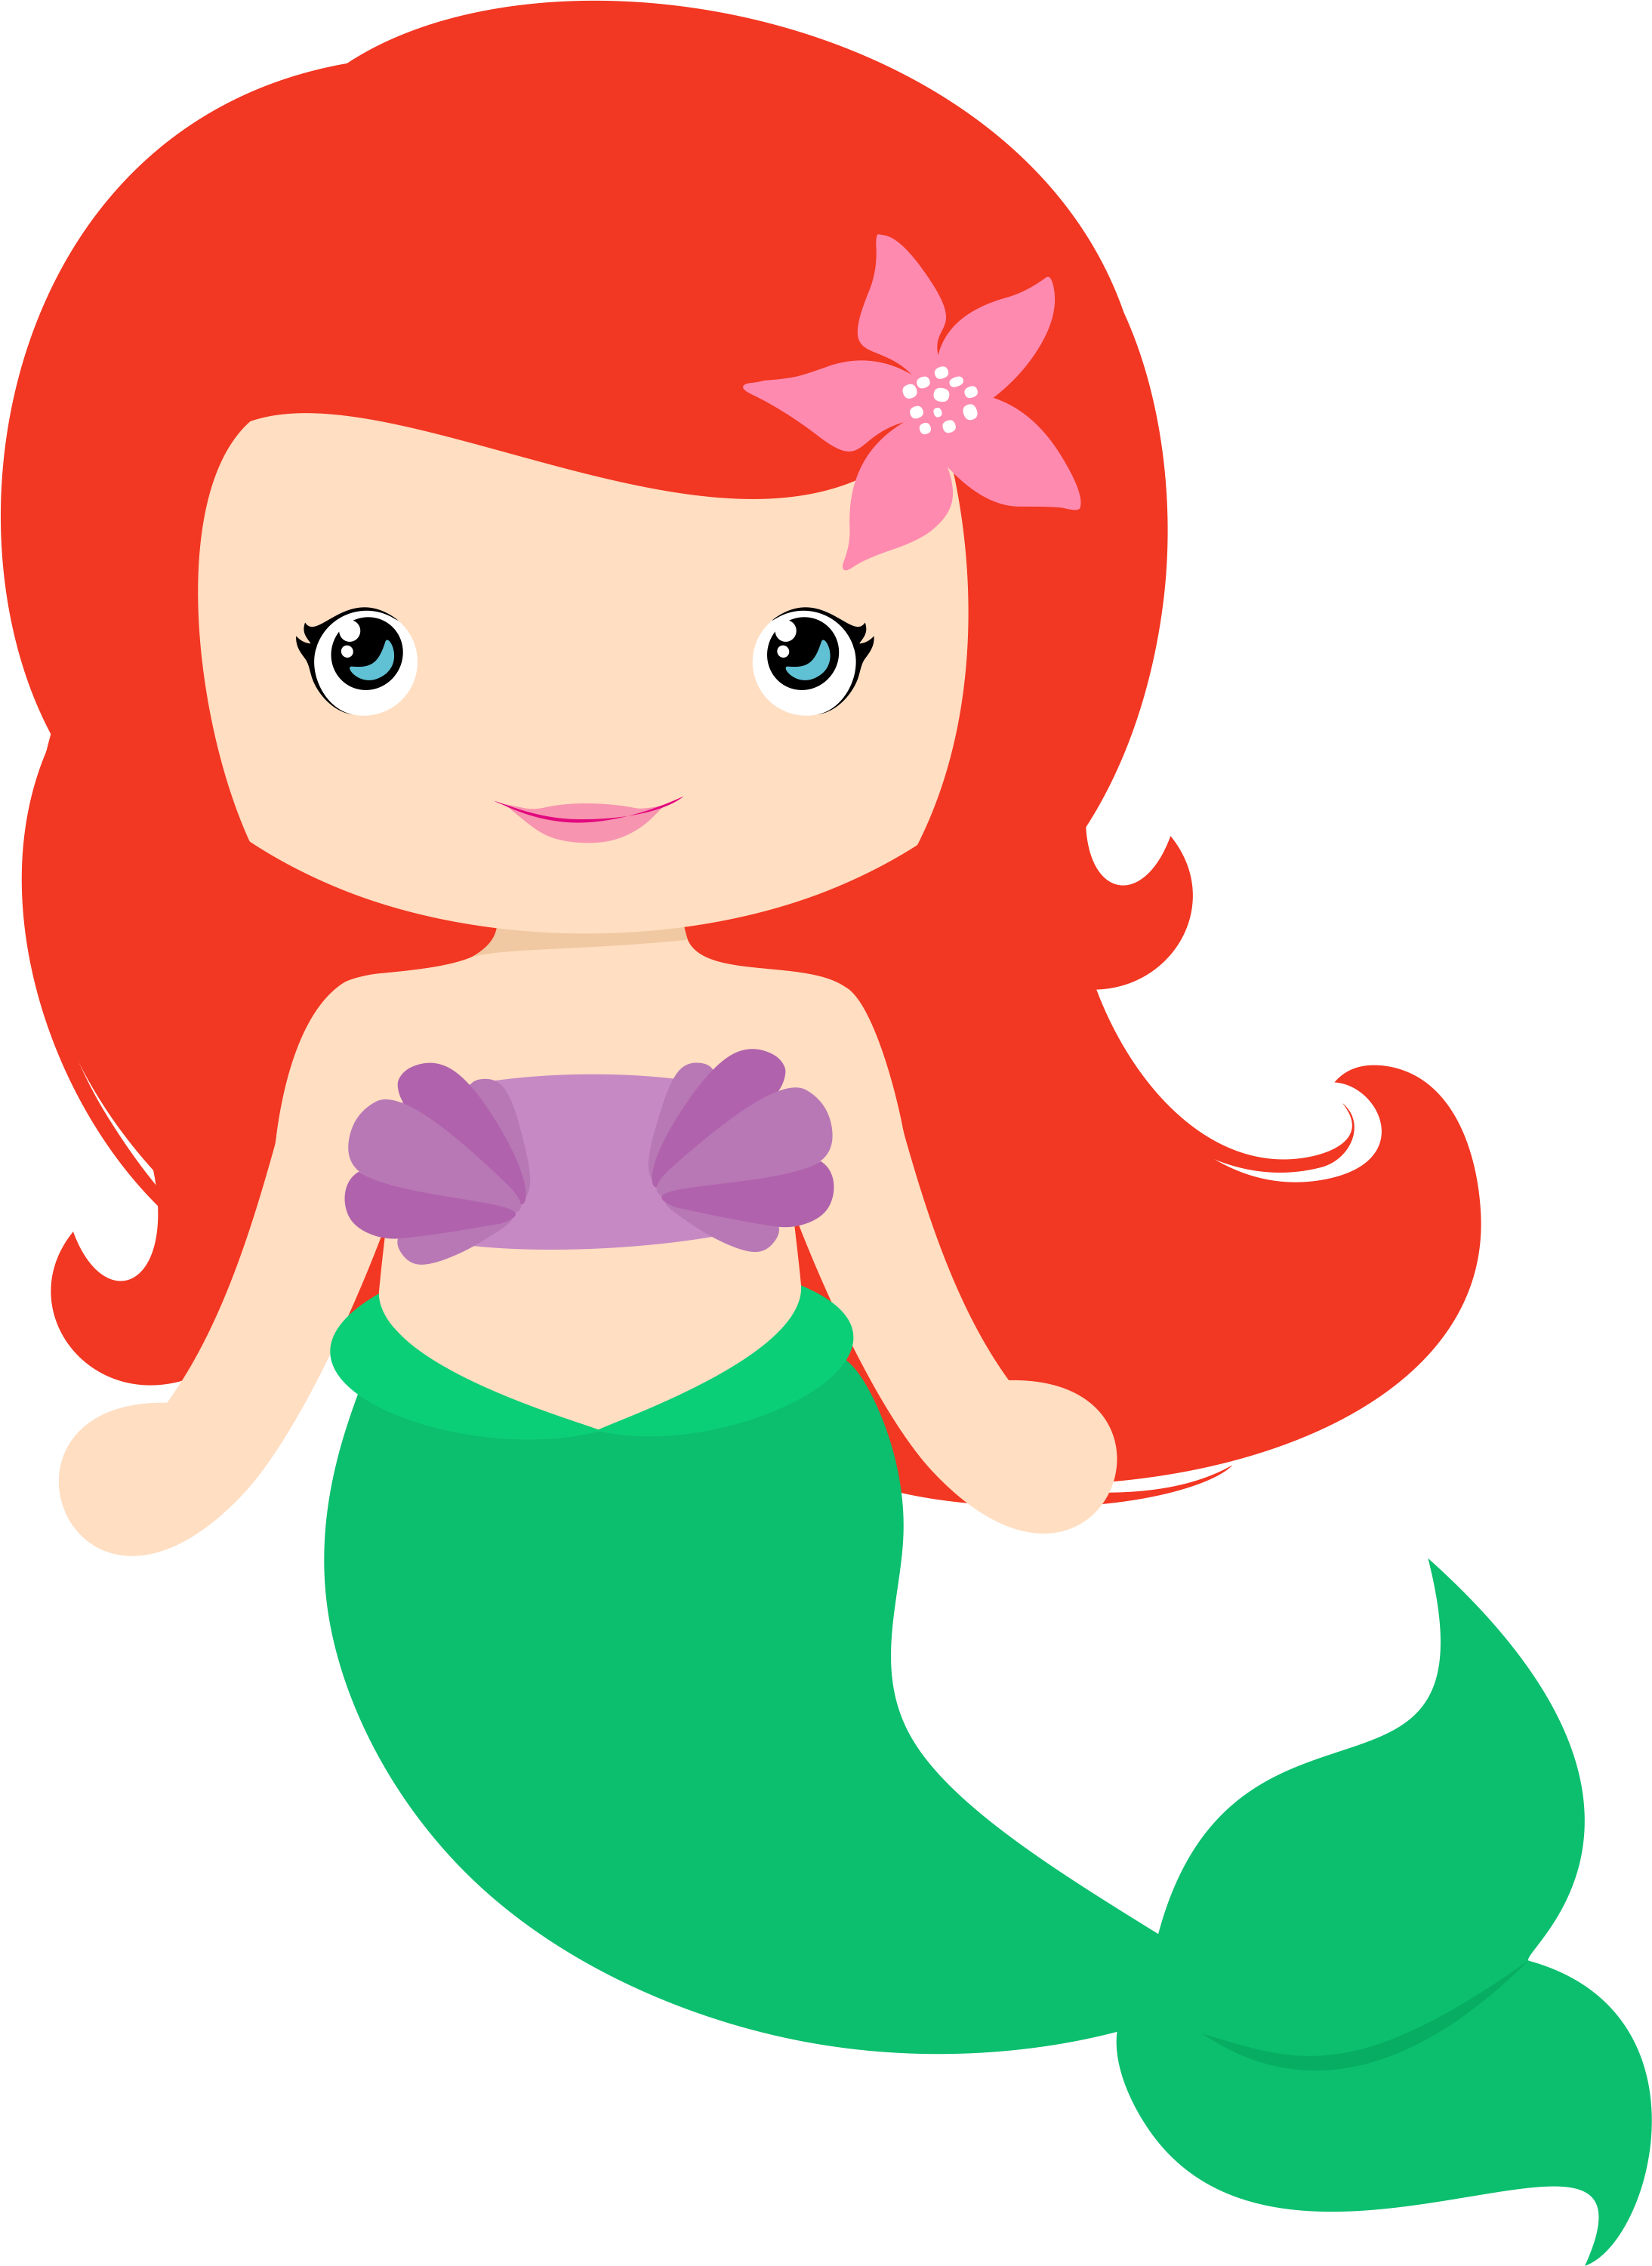  collection of high. Circle clipart mermaid